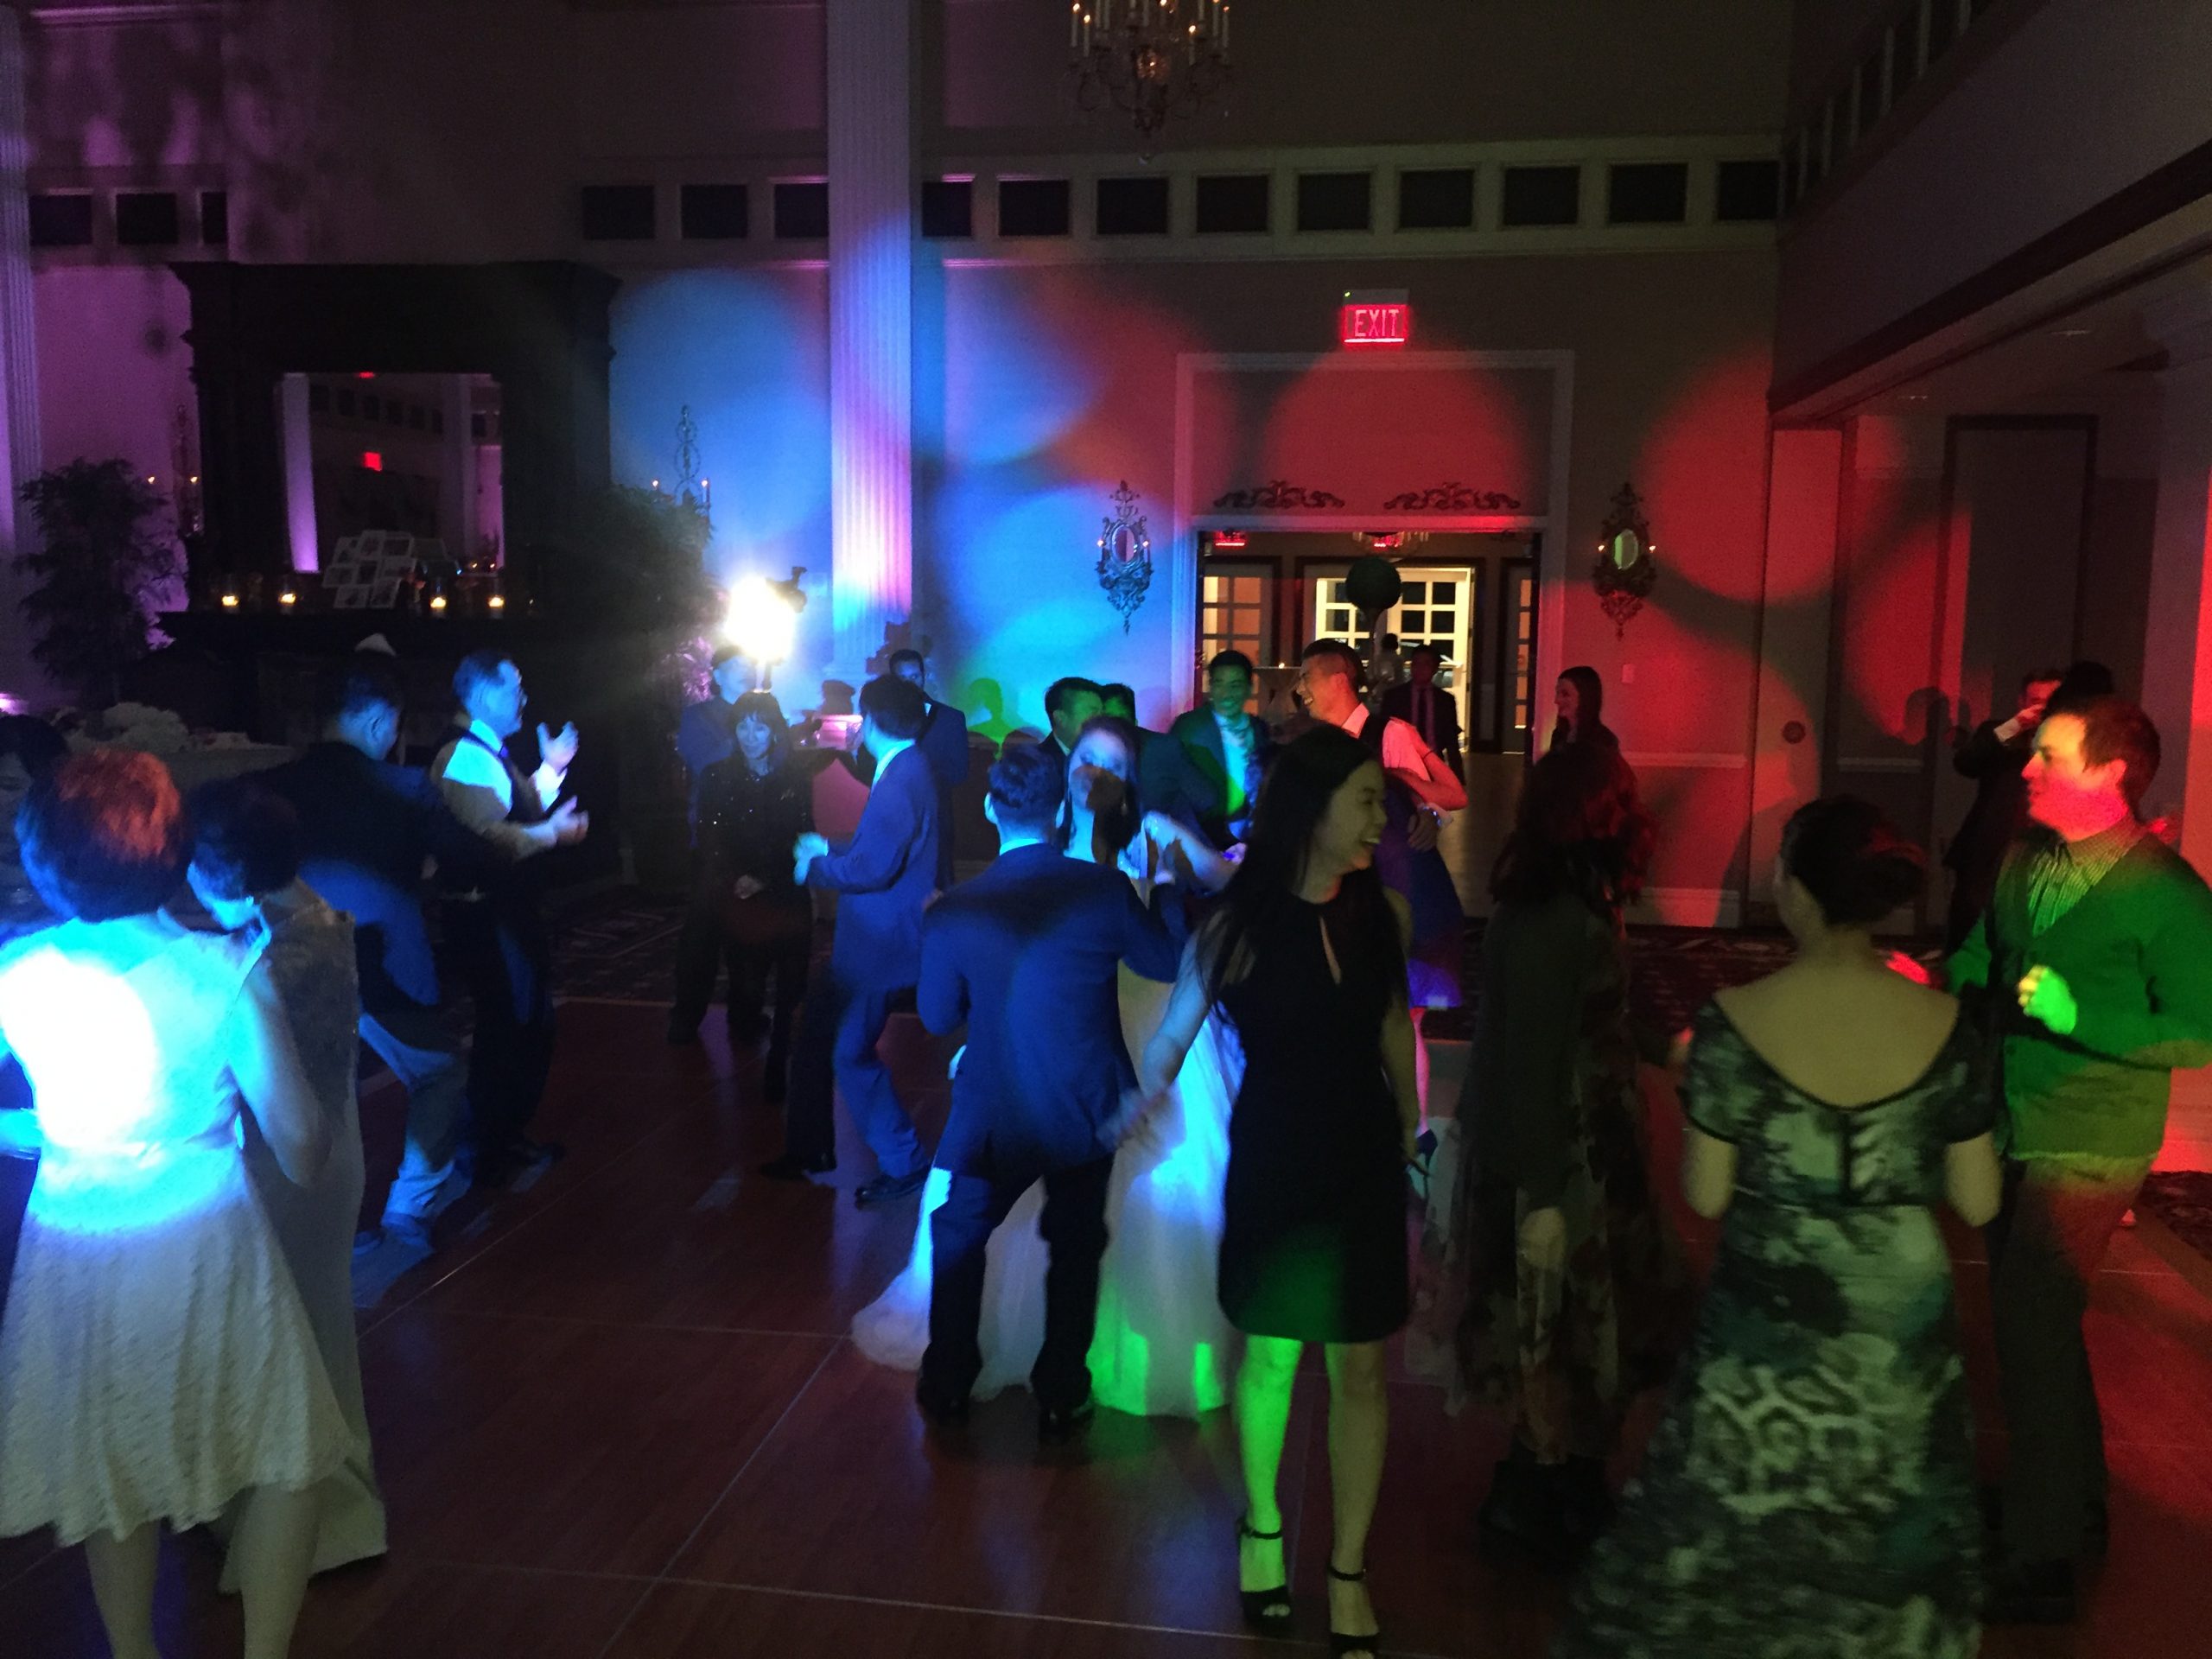 This shot does not do the dance floor justice!